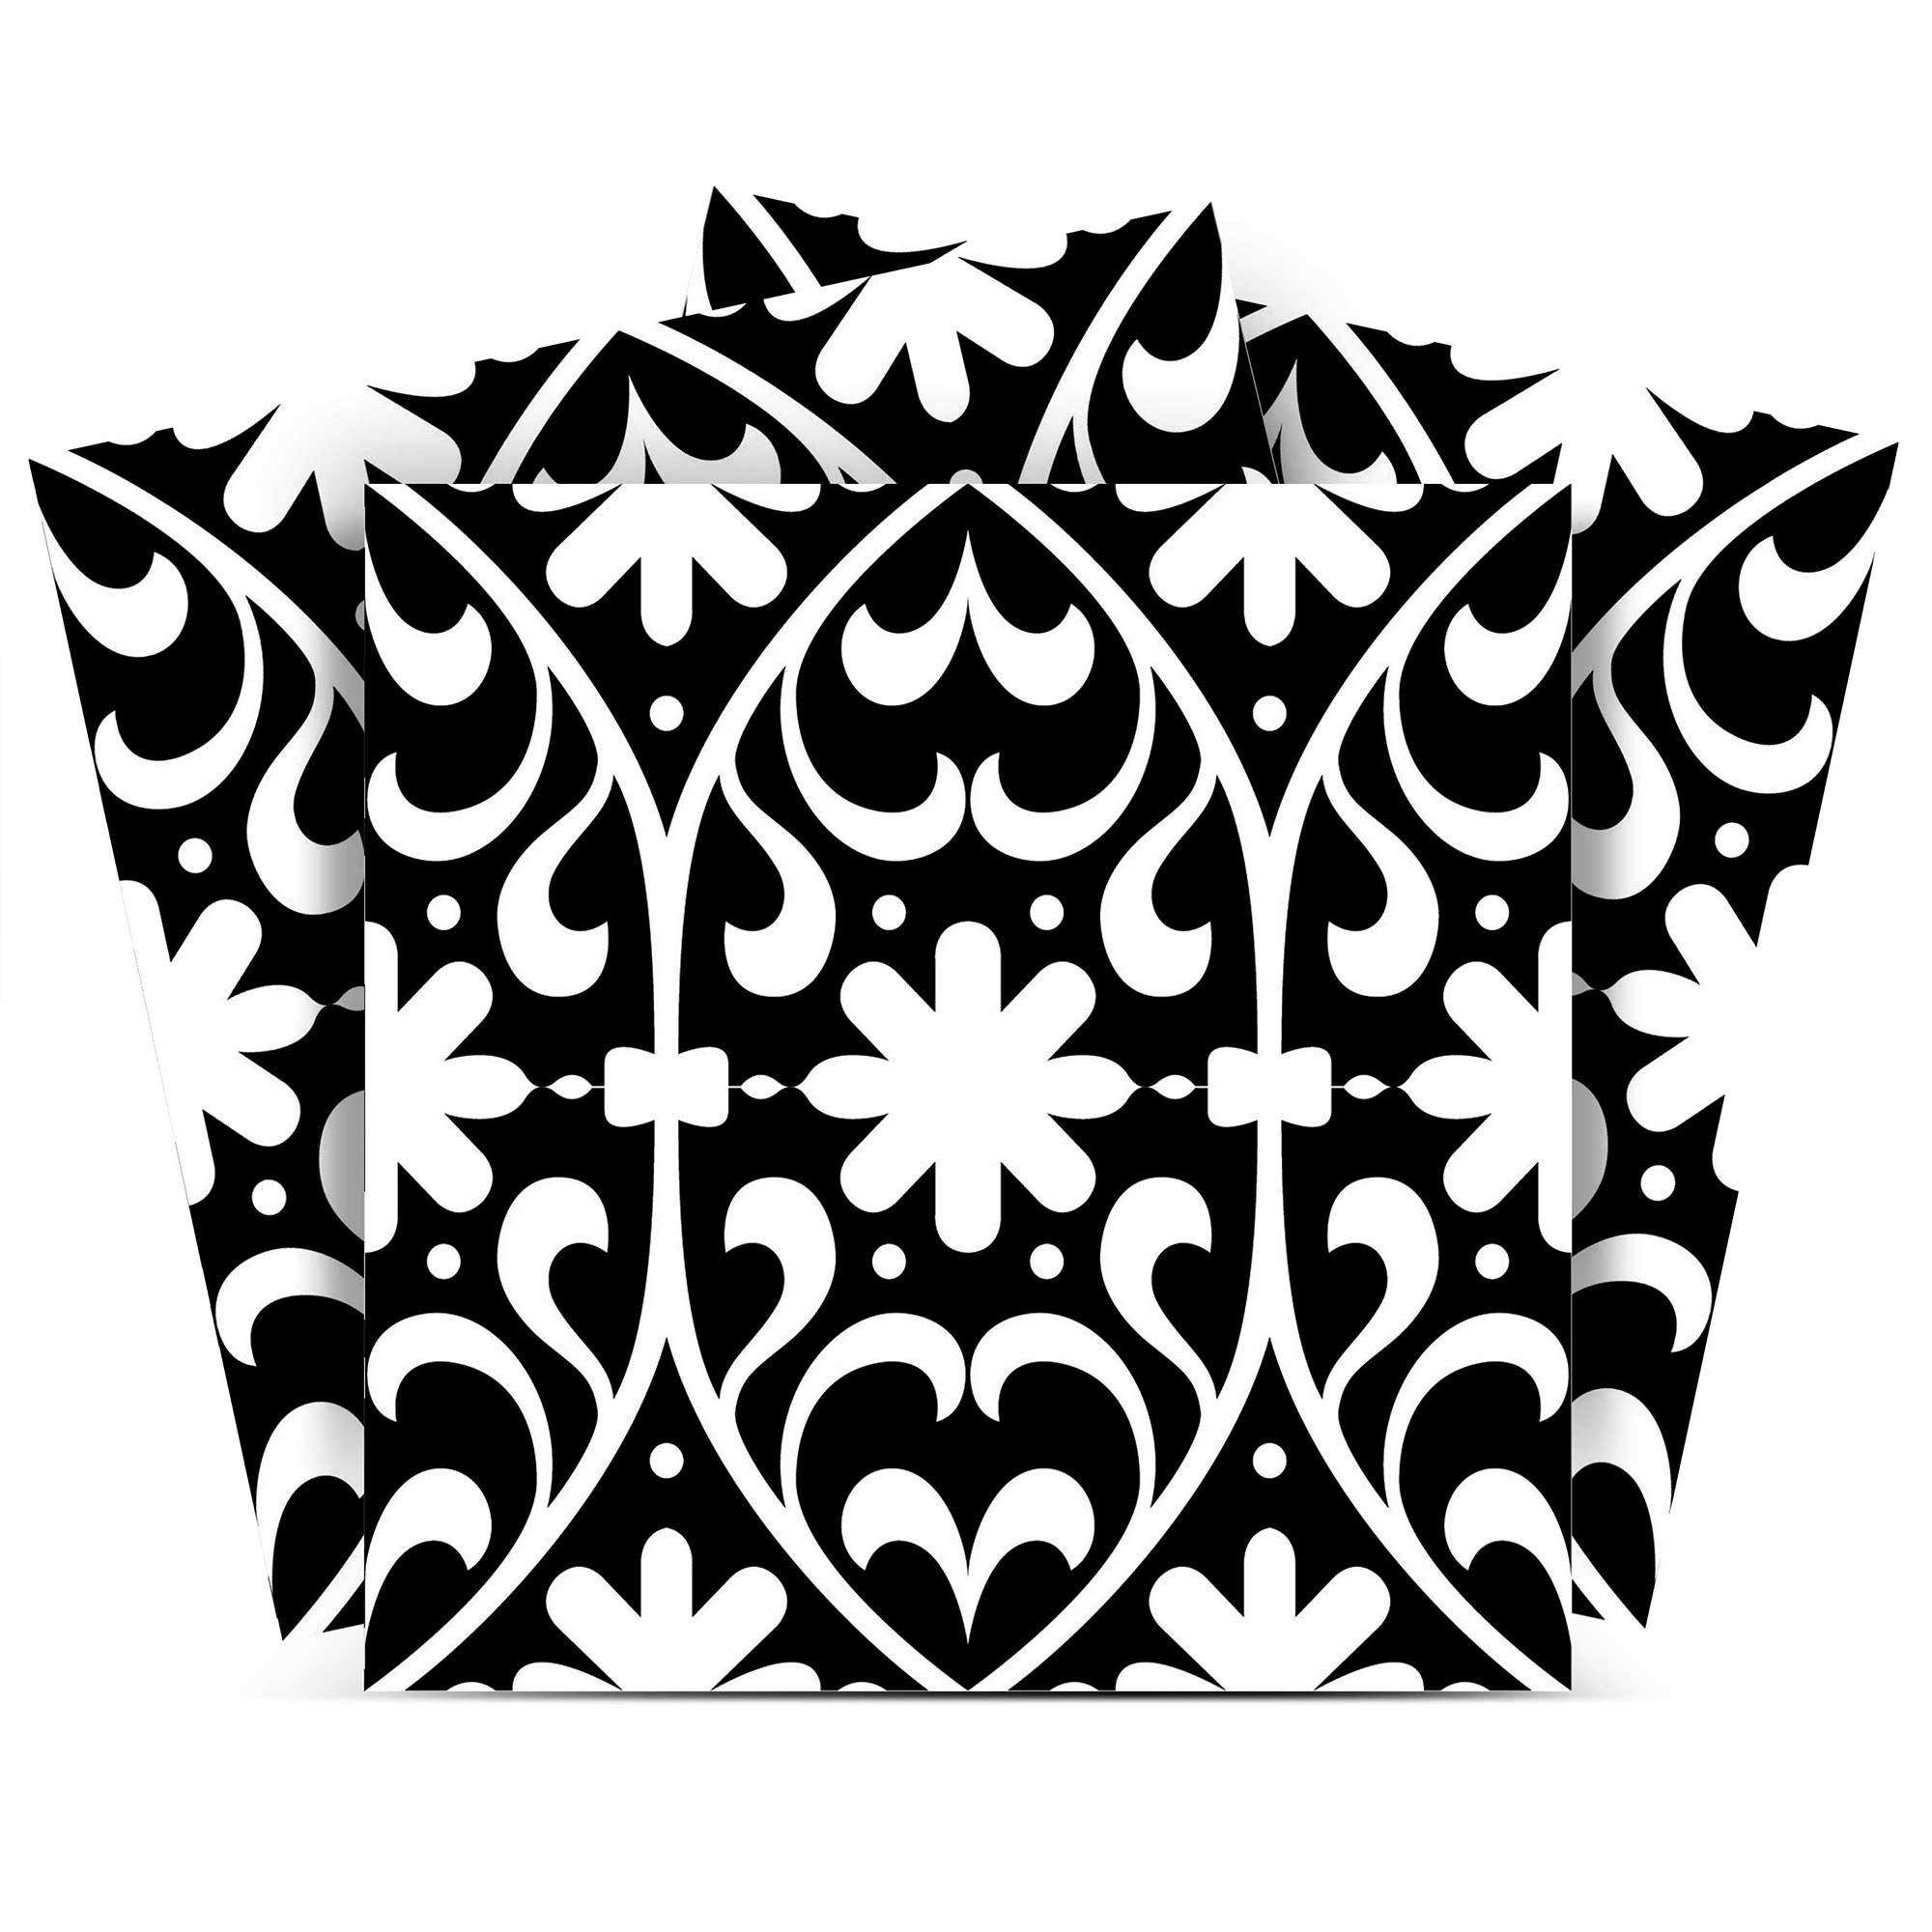 6" X 6" Black and White Floral Peel and Stick Removable Tiles-399877-1